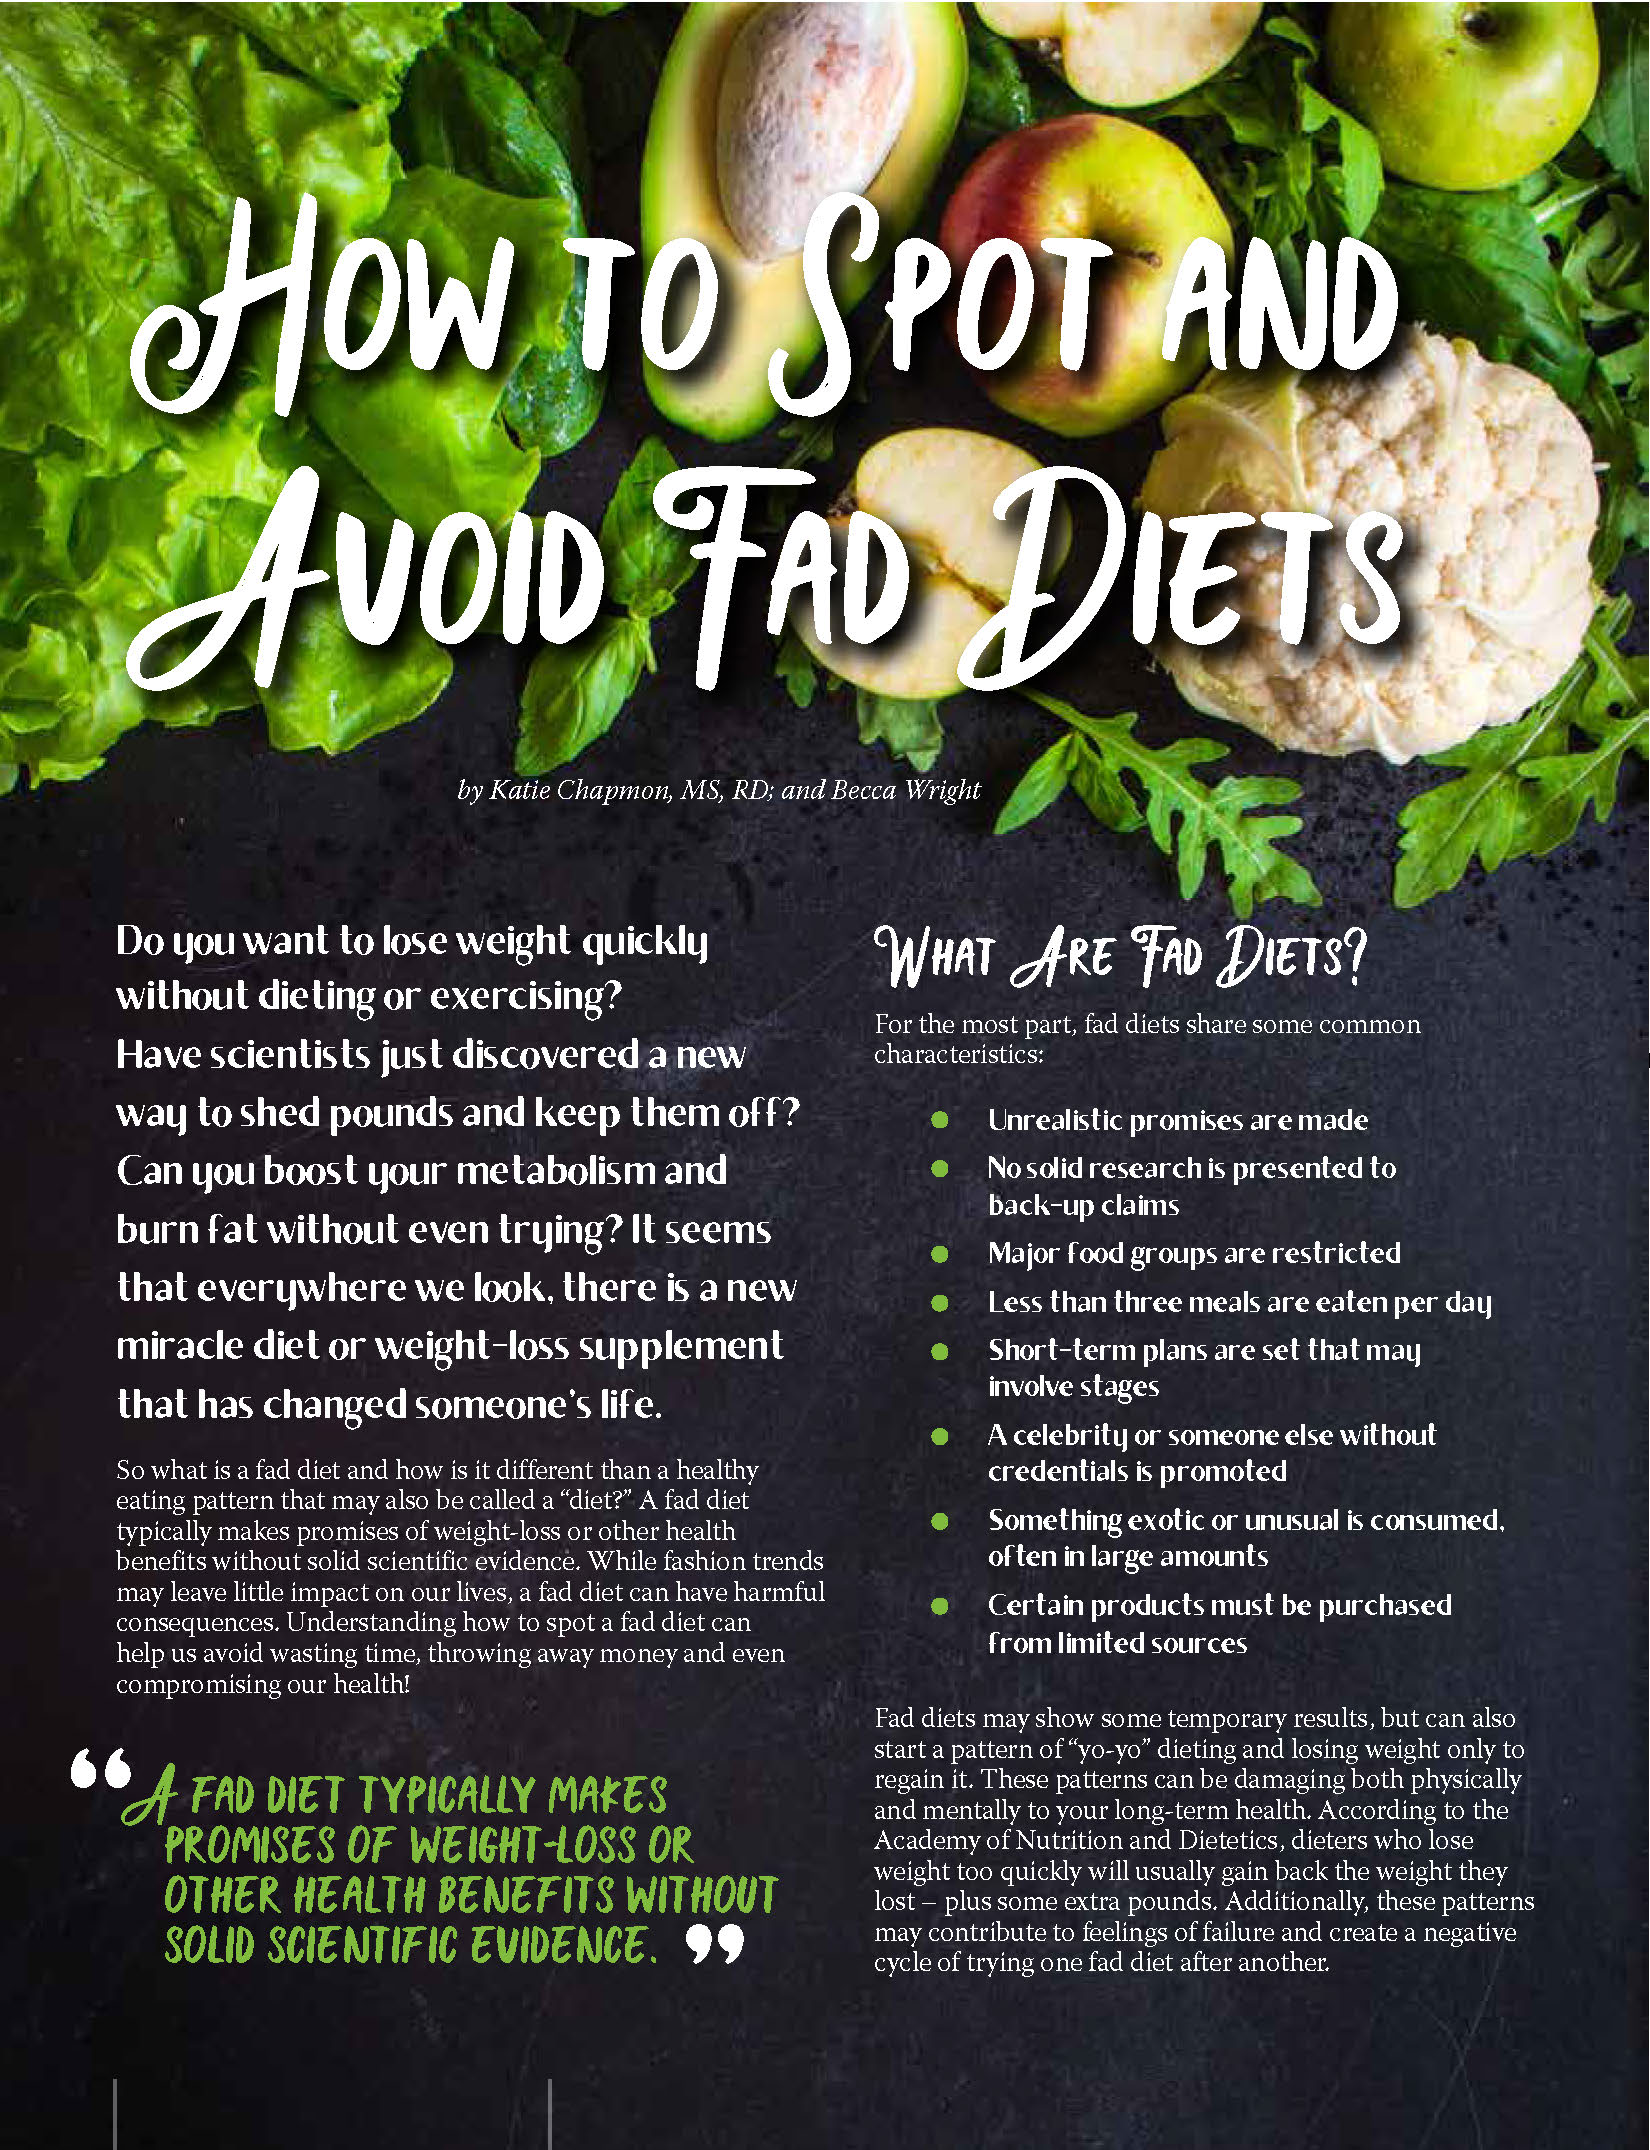 How to Spot and Avoid Fad Diets Obesity Action Coalition